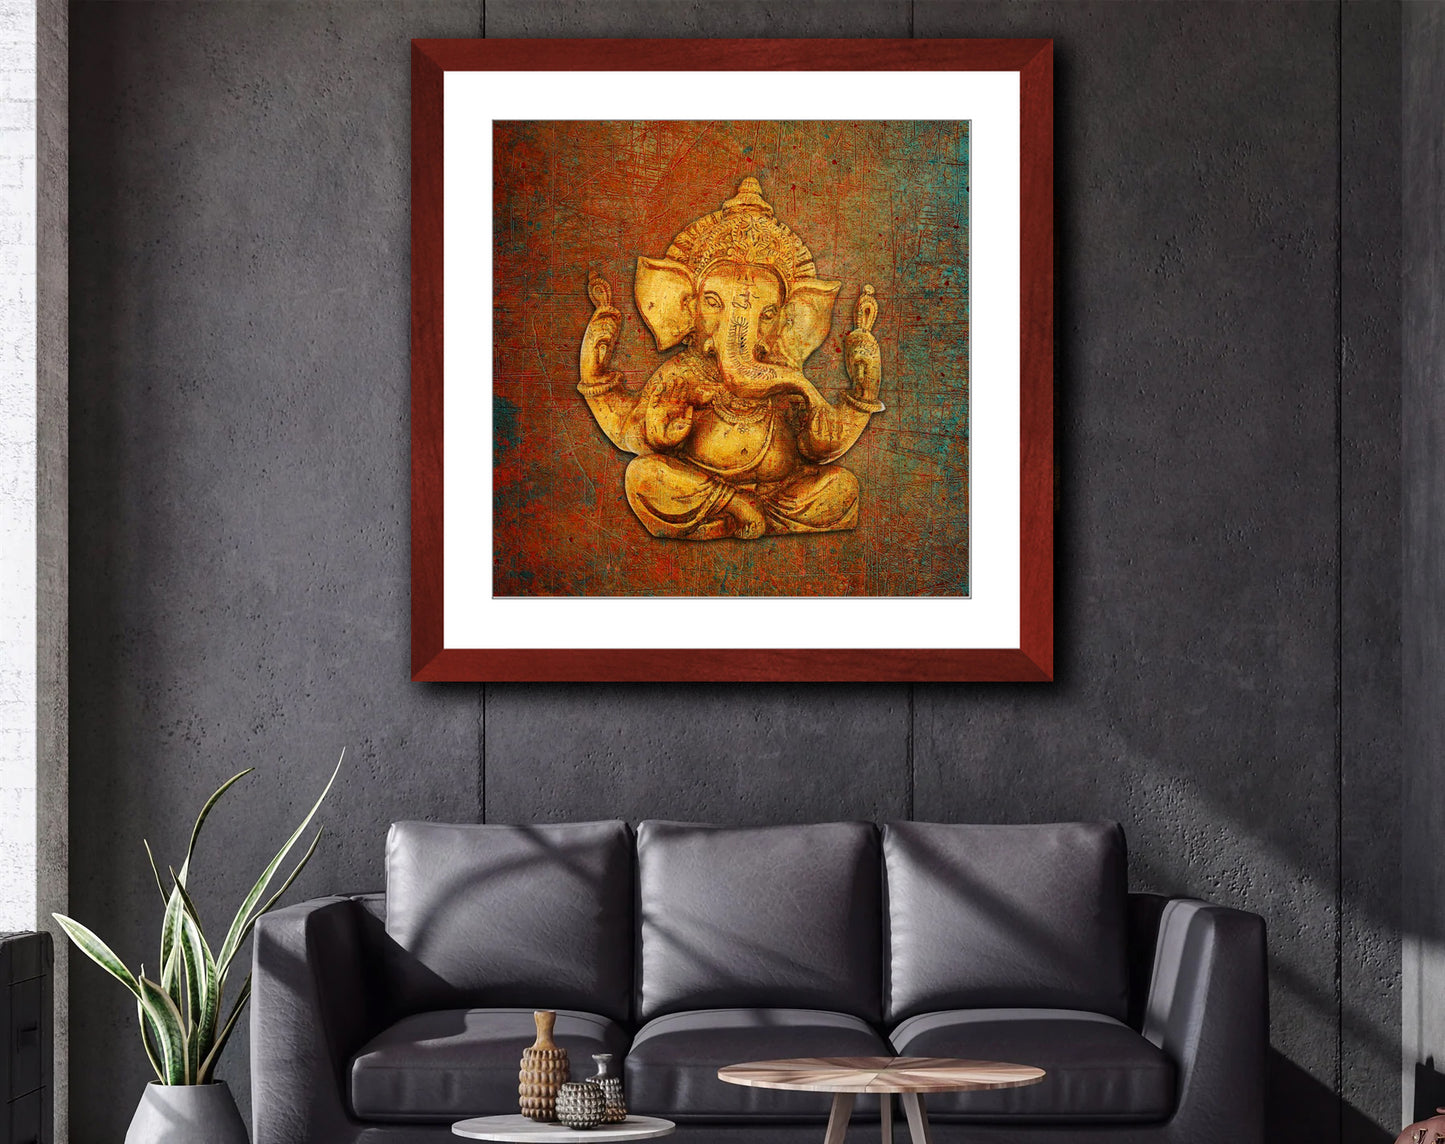 Ganesha on a Distressed Brown Background Print in Cherry Color Wood Frame Hung